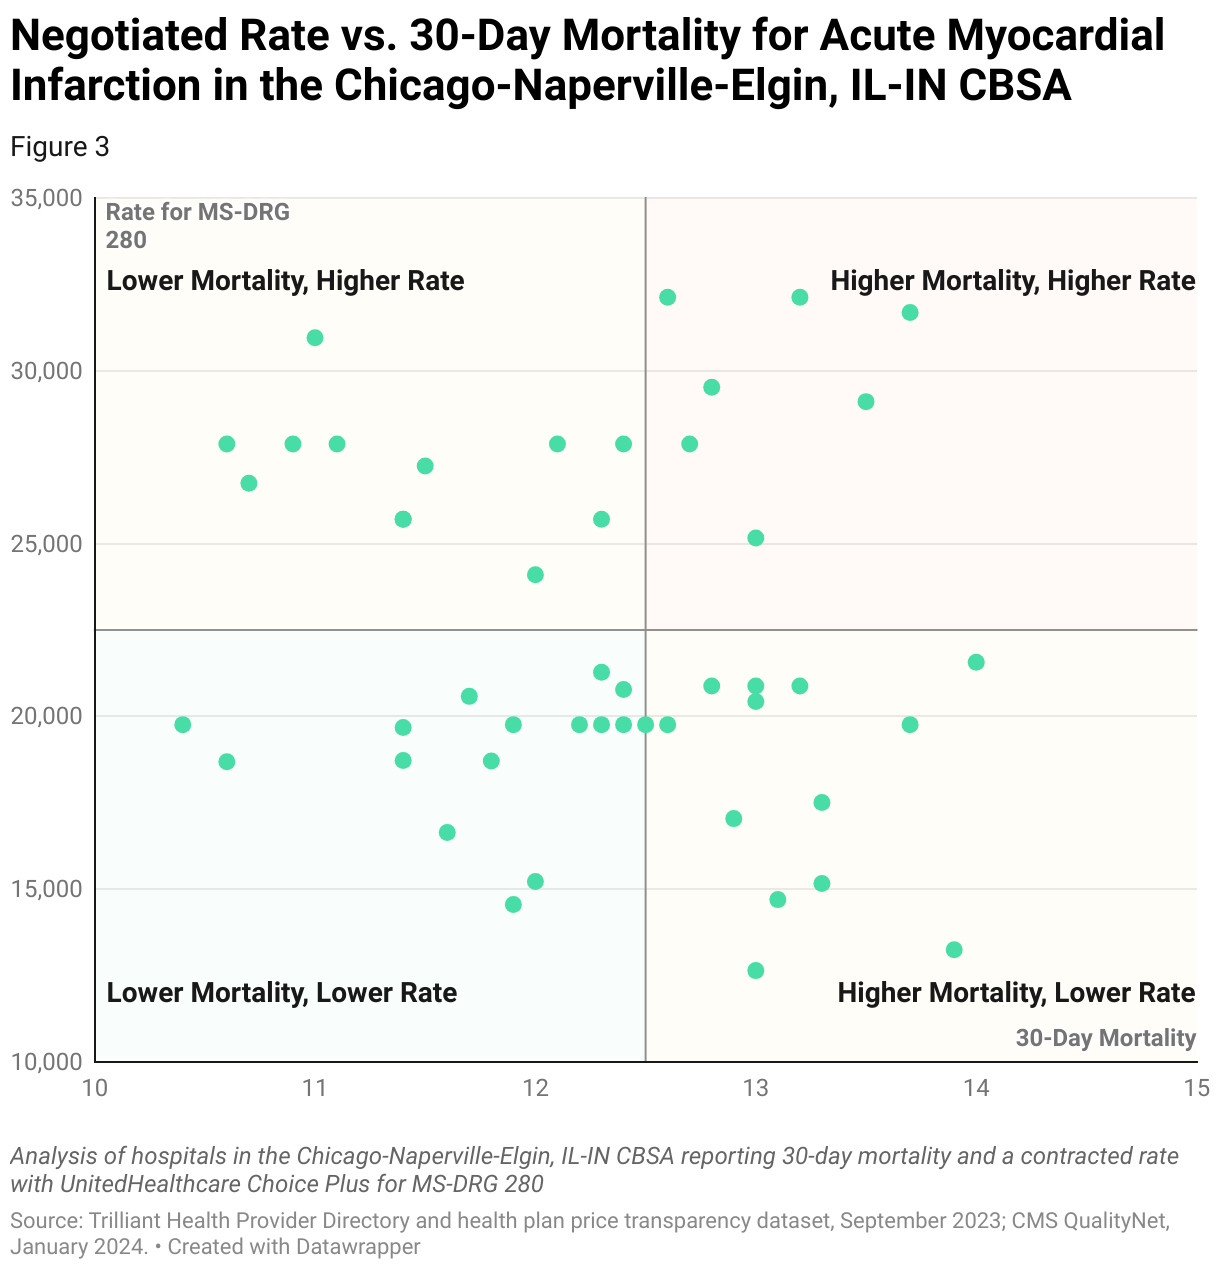 Chart comparing UnitedHealthcare Choice Plus in-network negotiated rates with 30-day post-discharge mortality for Acute Myocardial Infarction for hospitals in the Chicago-Naperville-Elgin, IL-IN CBSA